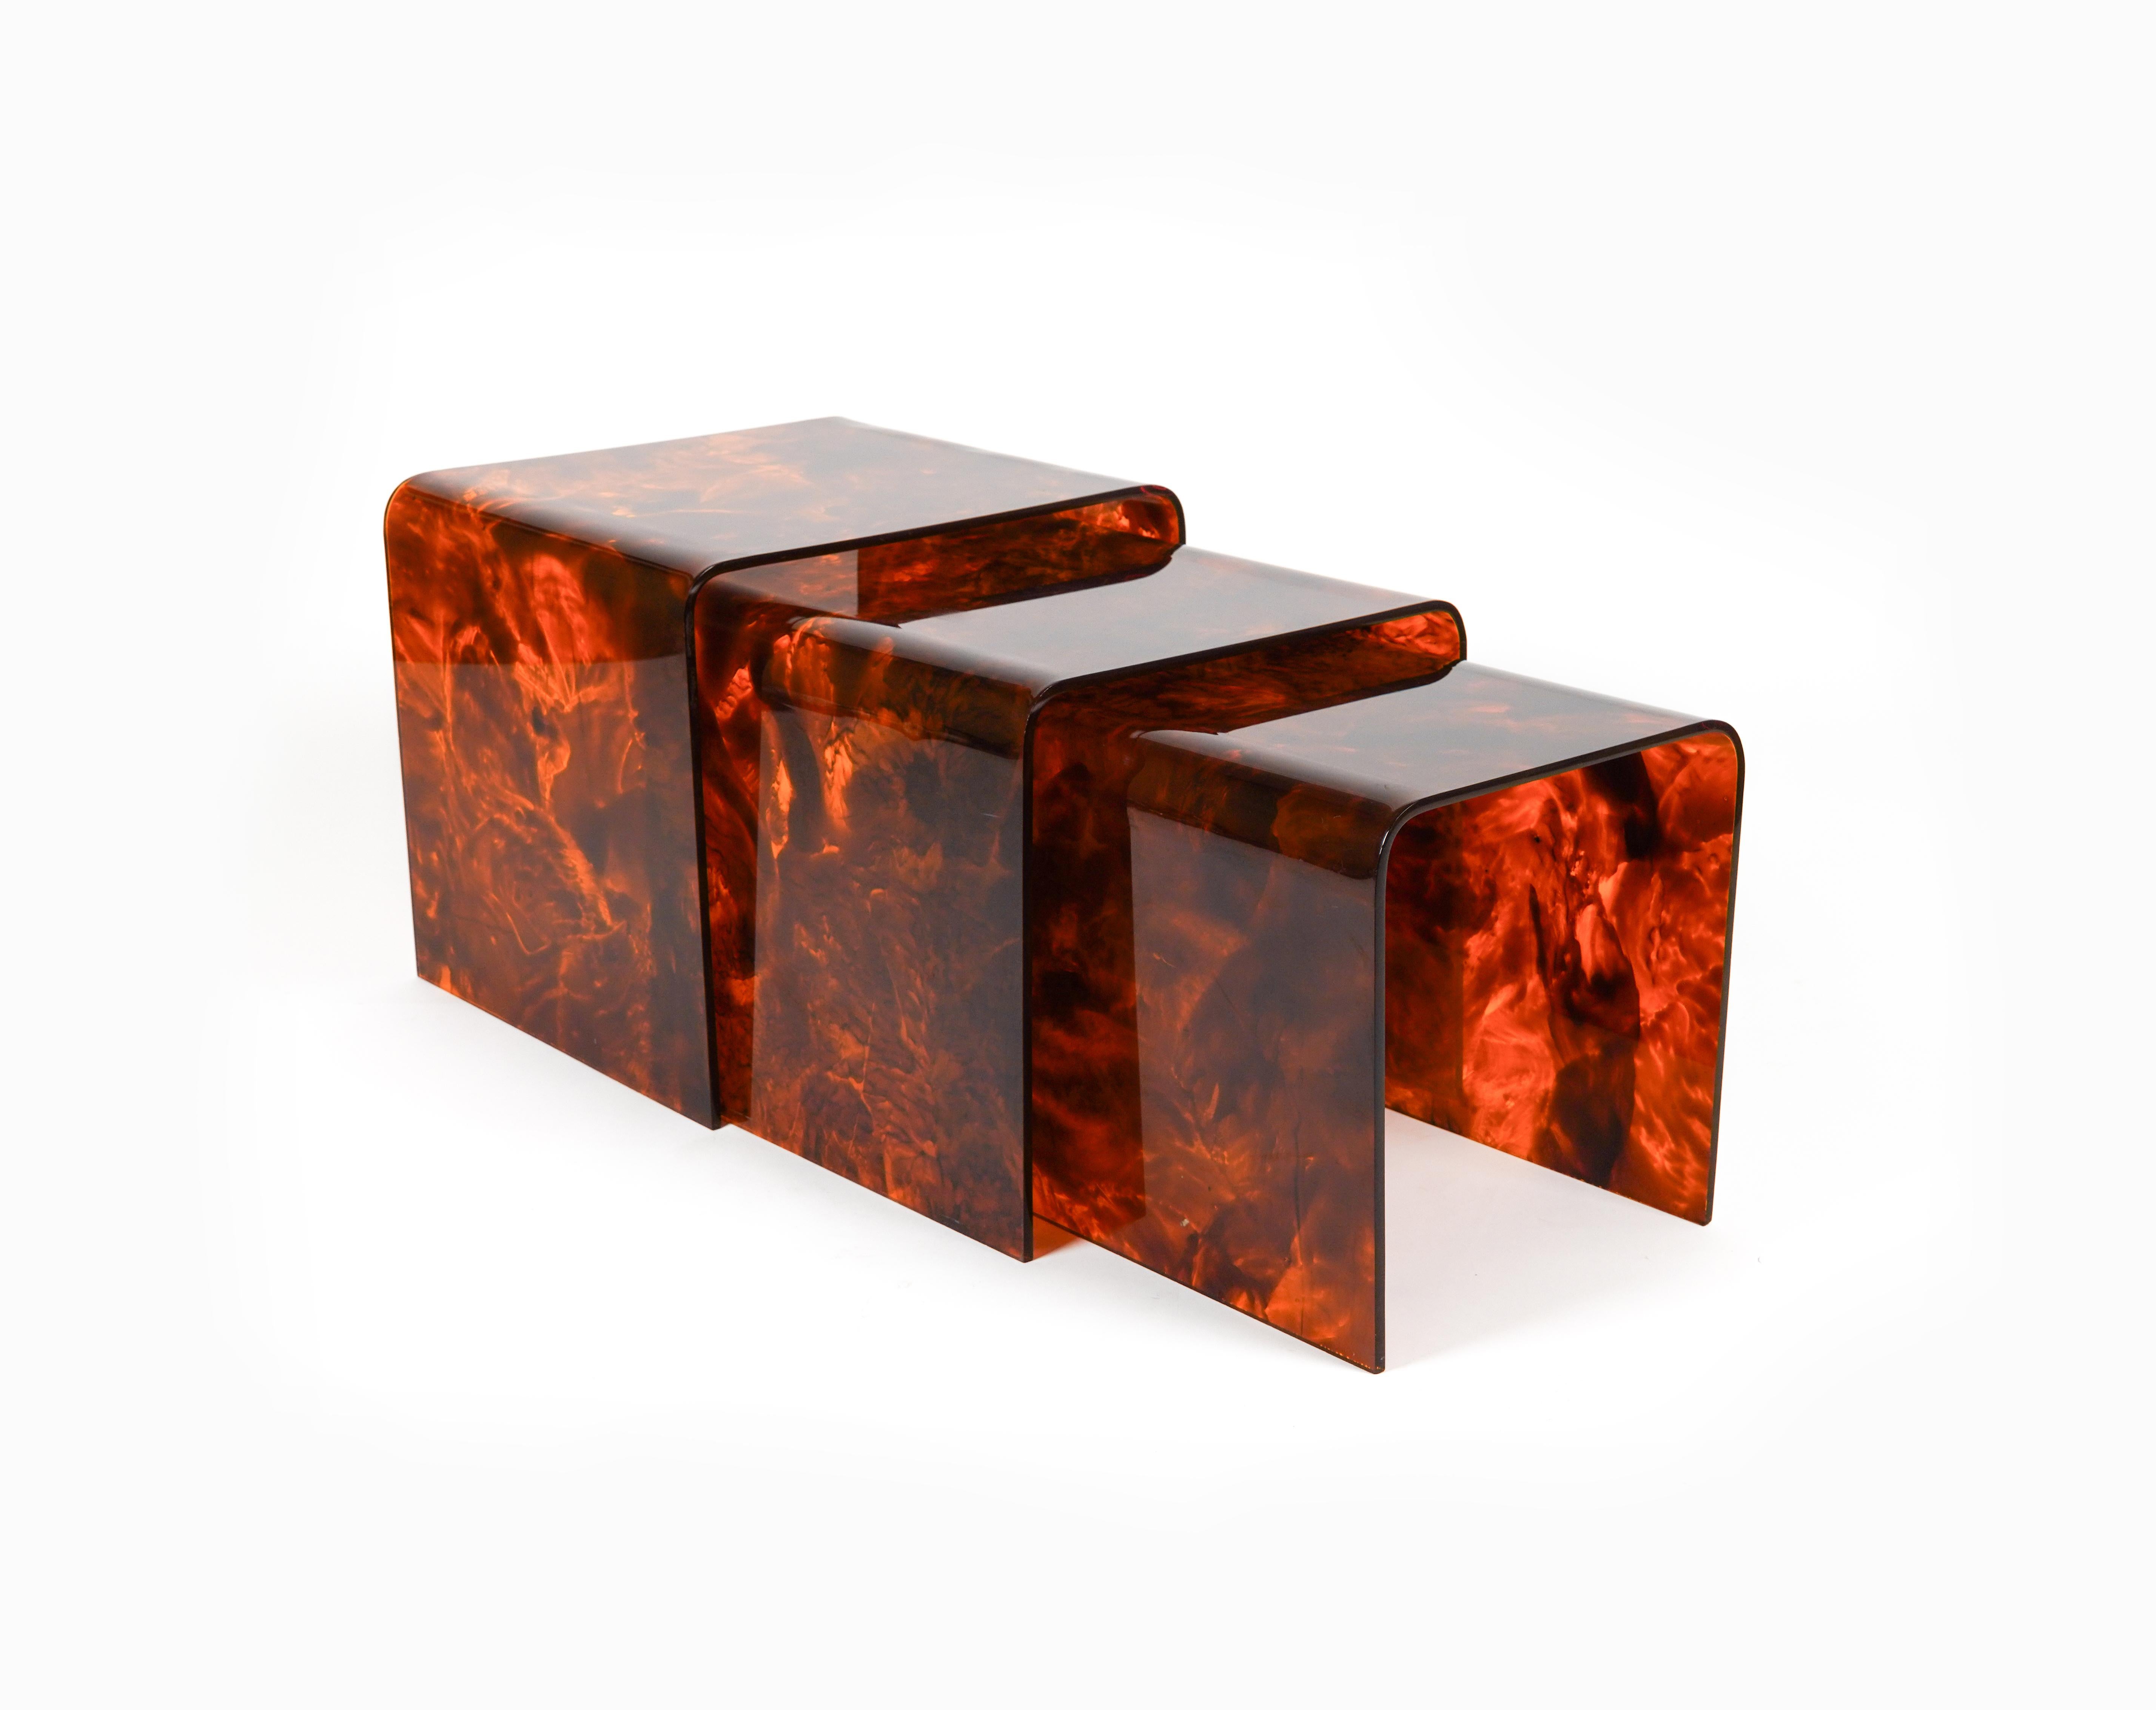 Set of 3 Nesting Tables in Lucite Faux Tortoiseshell Christian Dior, Italy 1970s For Sale 3